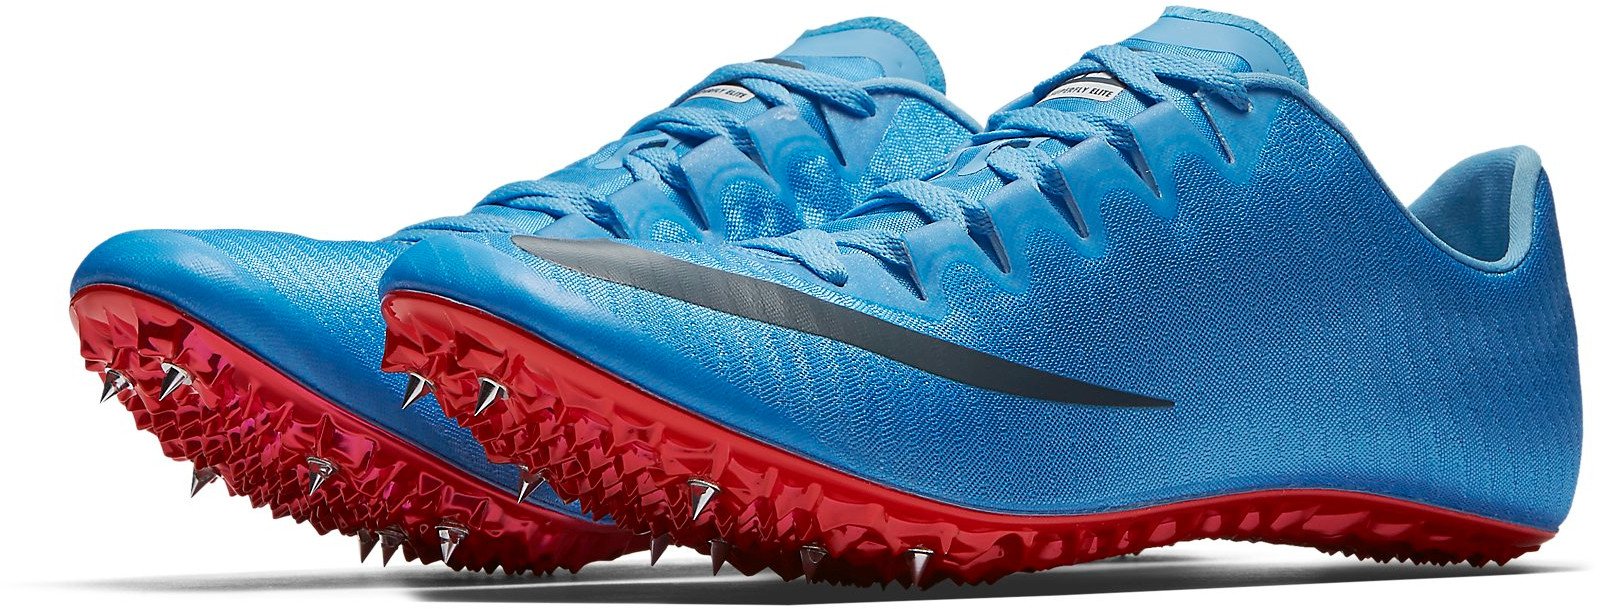 nike zoom superfly spikes